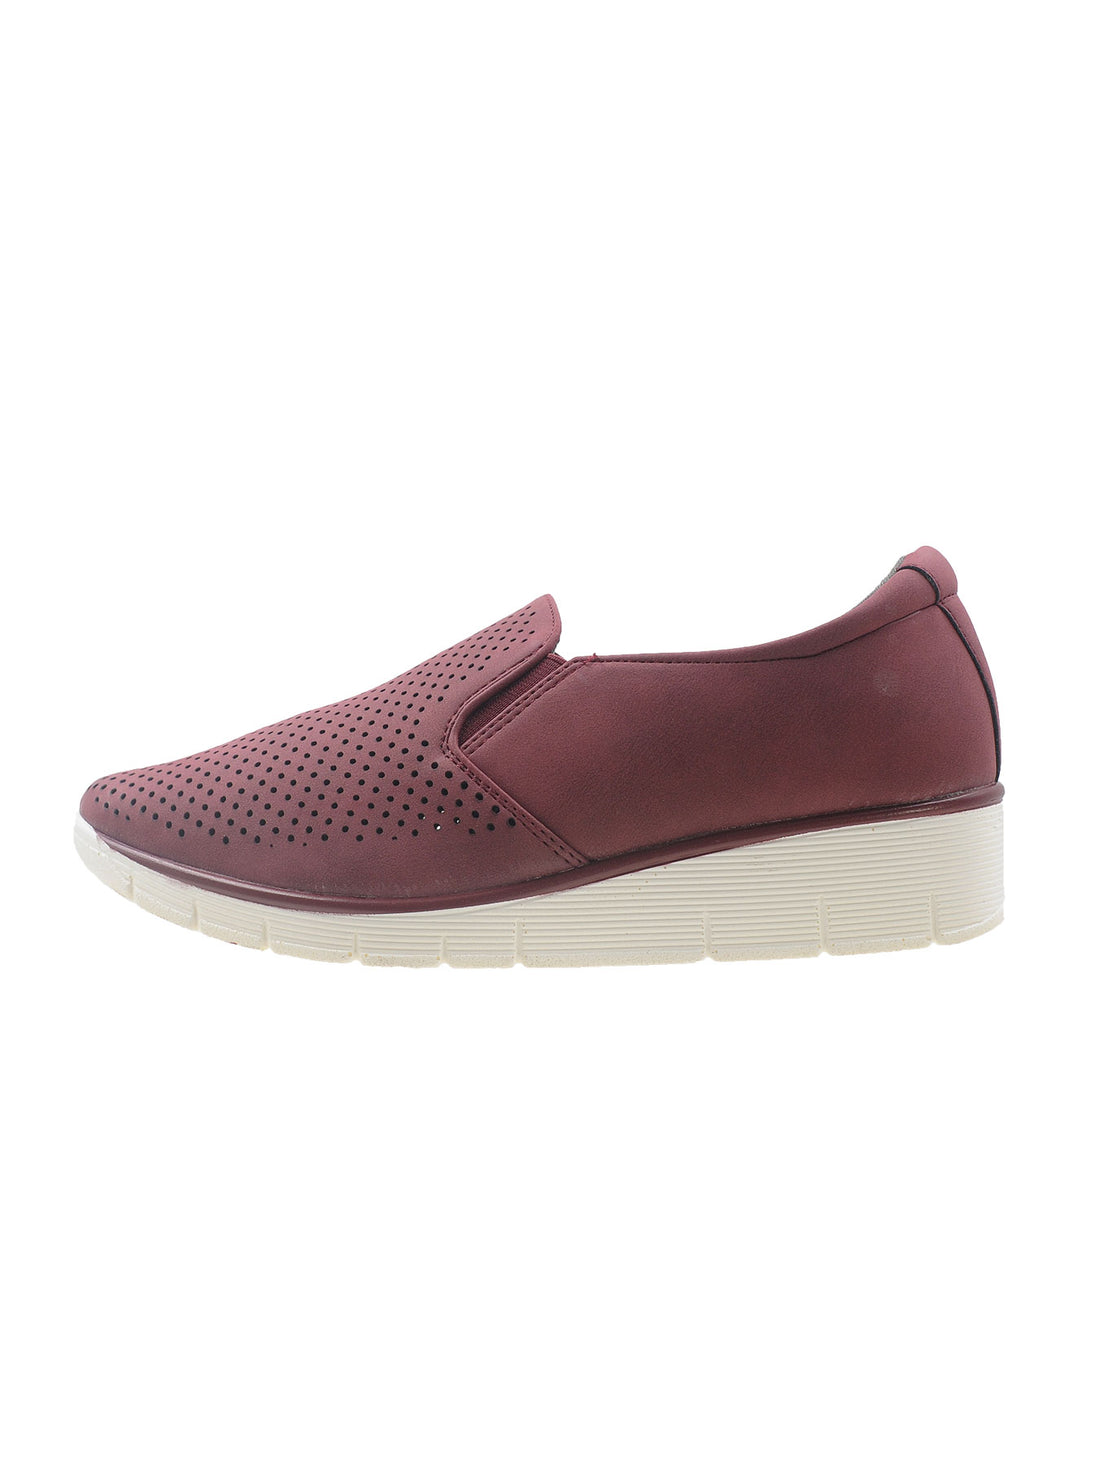 Larrie Red Urban Line Personality Moccasin Flats